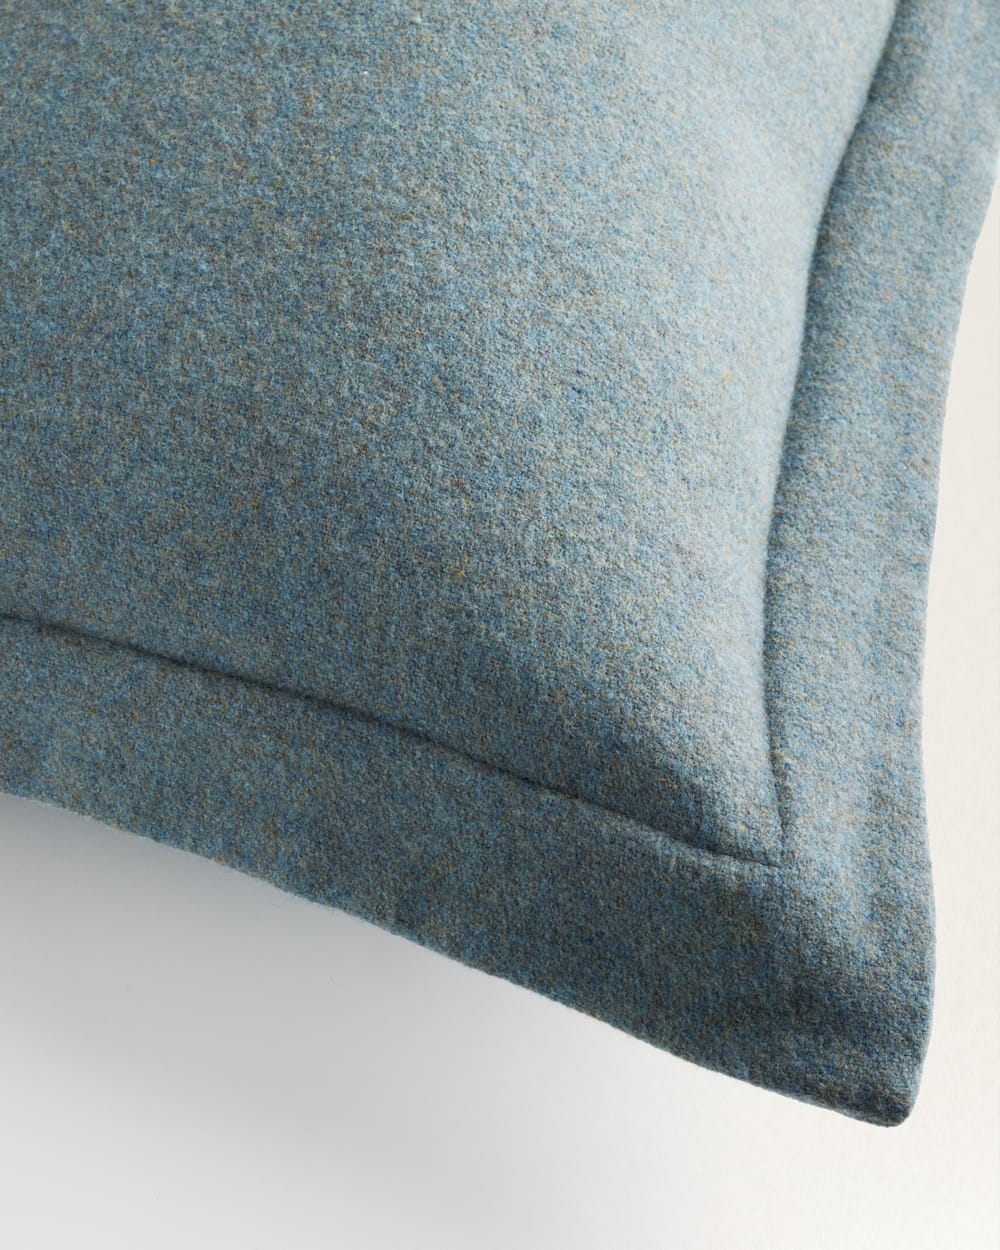 ALTERNATE VIEW OF ECO-WISE WOOL EASY-CARE SHAM IN SHALE BLUE image number 3